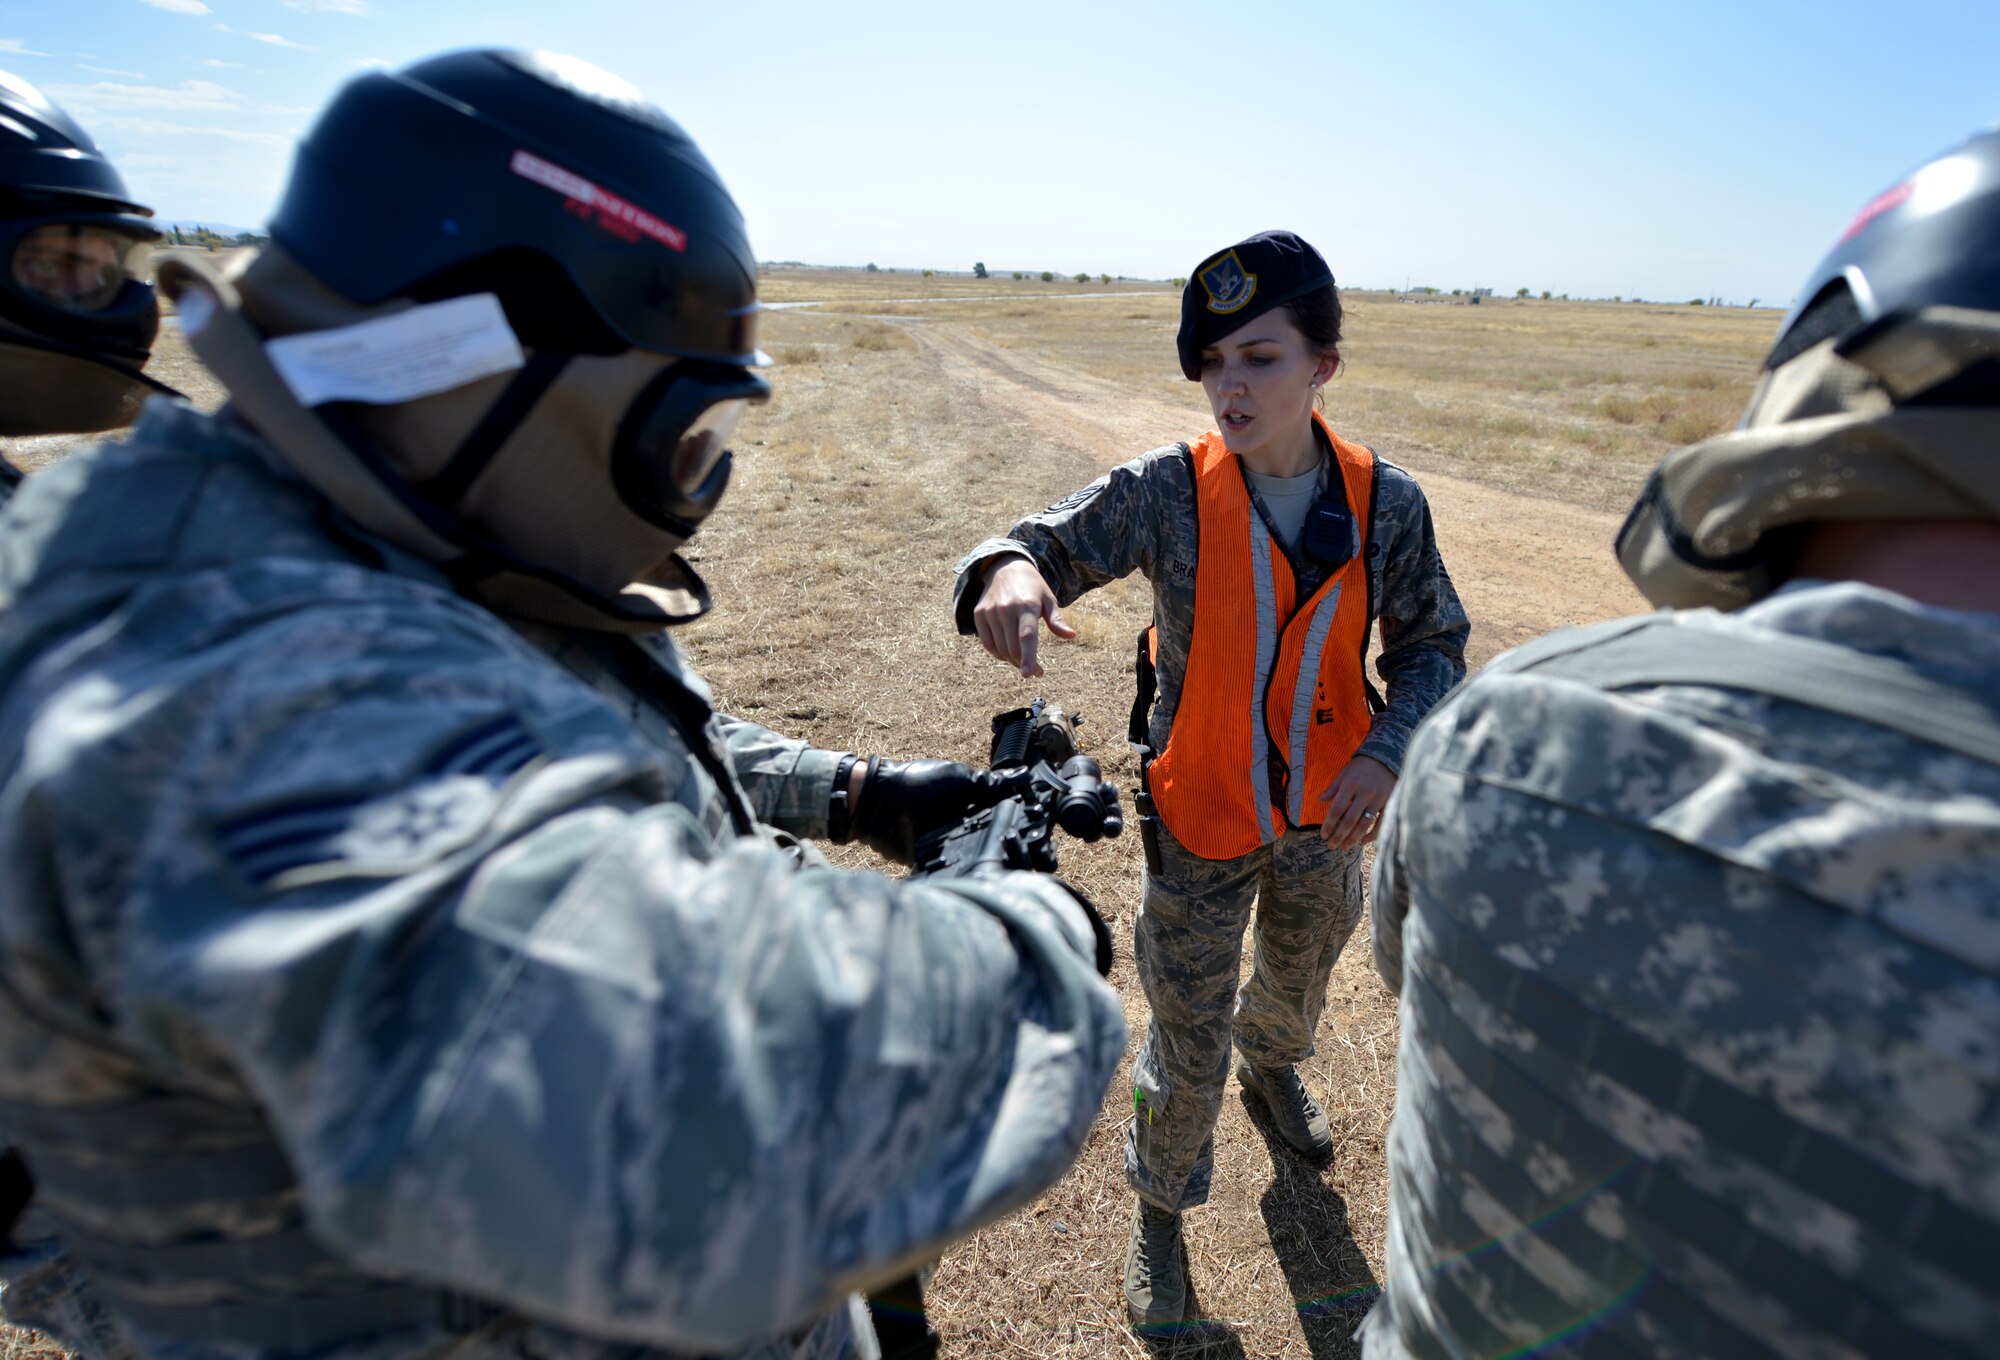 Staff Sgt. Kirsten Bradley, 9th Security Forces Squadron training instructor, inspects weapons during a pilot-rescue exercise at Beale Air Force Base, Calif., Oct. 9, 2013. The 9th SFS worked closely with Air Force contractors who provided first-hand knowledge of enemy tactics. (U.S. Air Force photo by Senior Airman Drew Buchanan/Released)